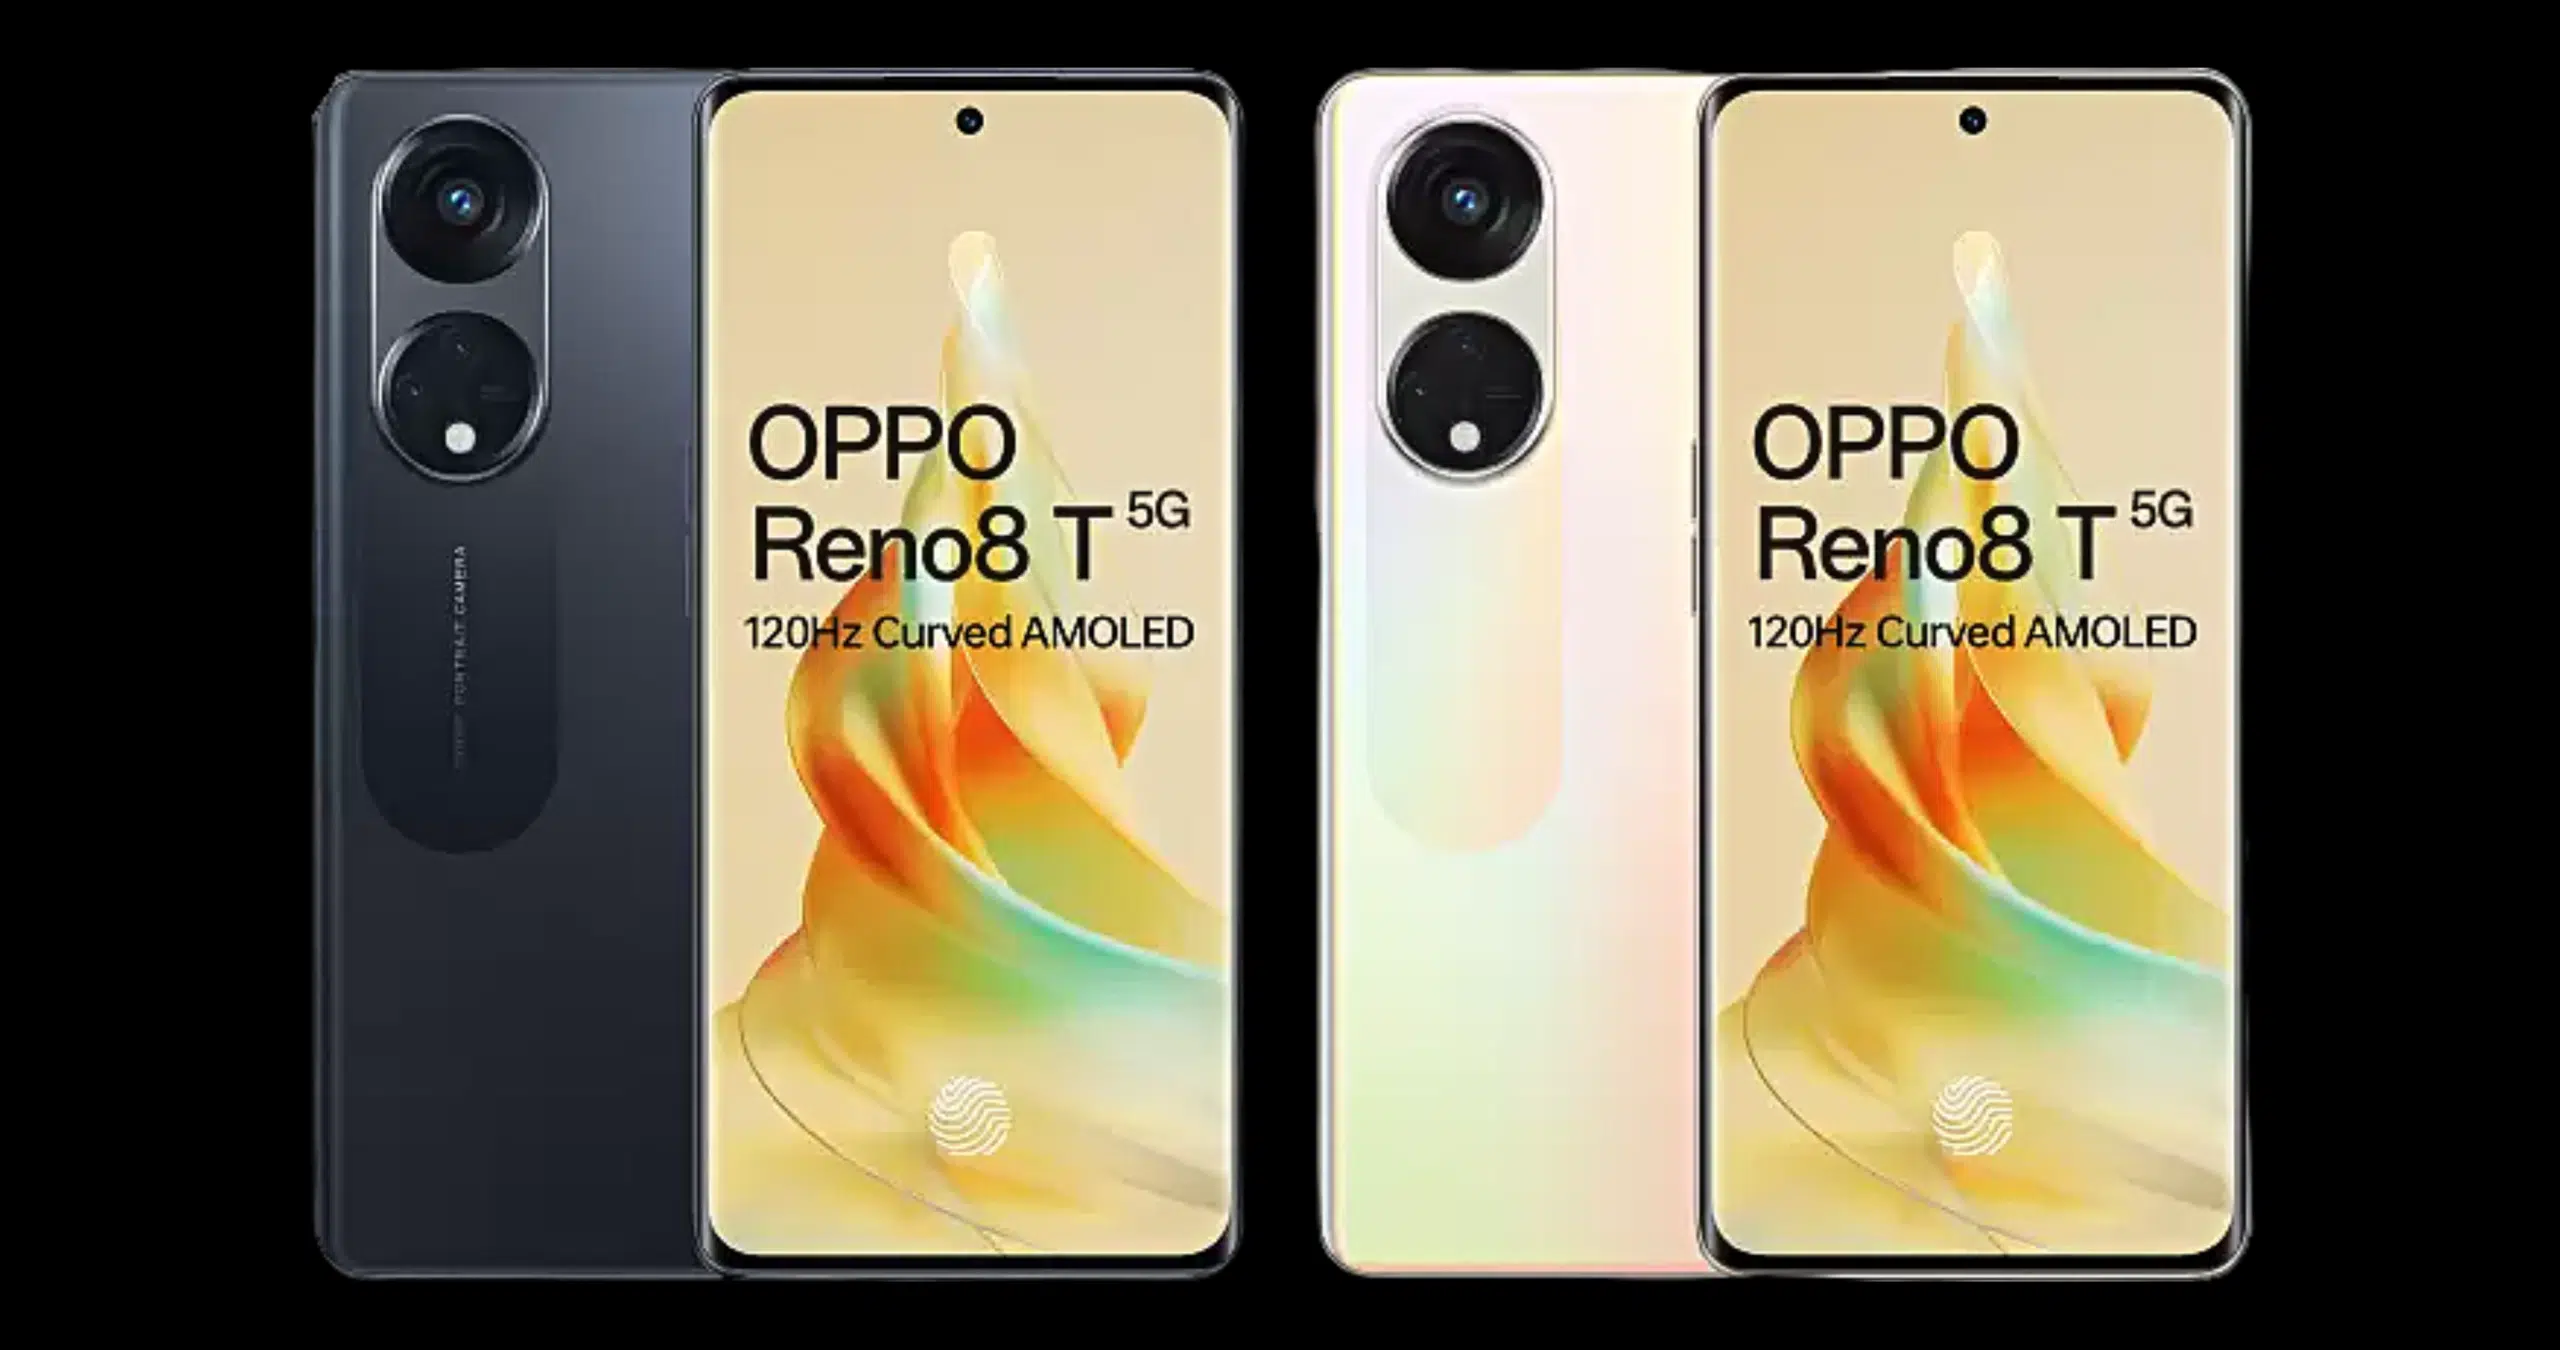 OPPO Reno 8T 5G is launched in India: Check Prices, Specifications